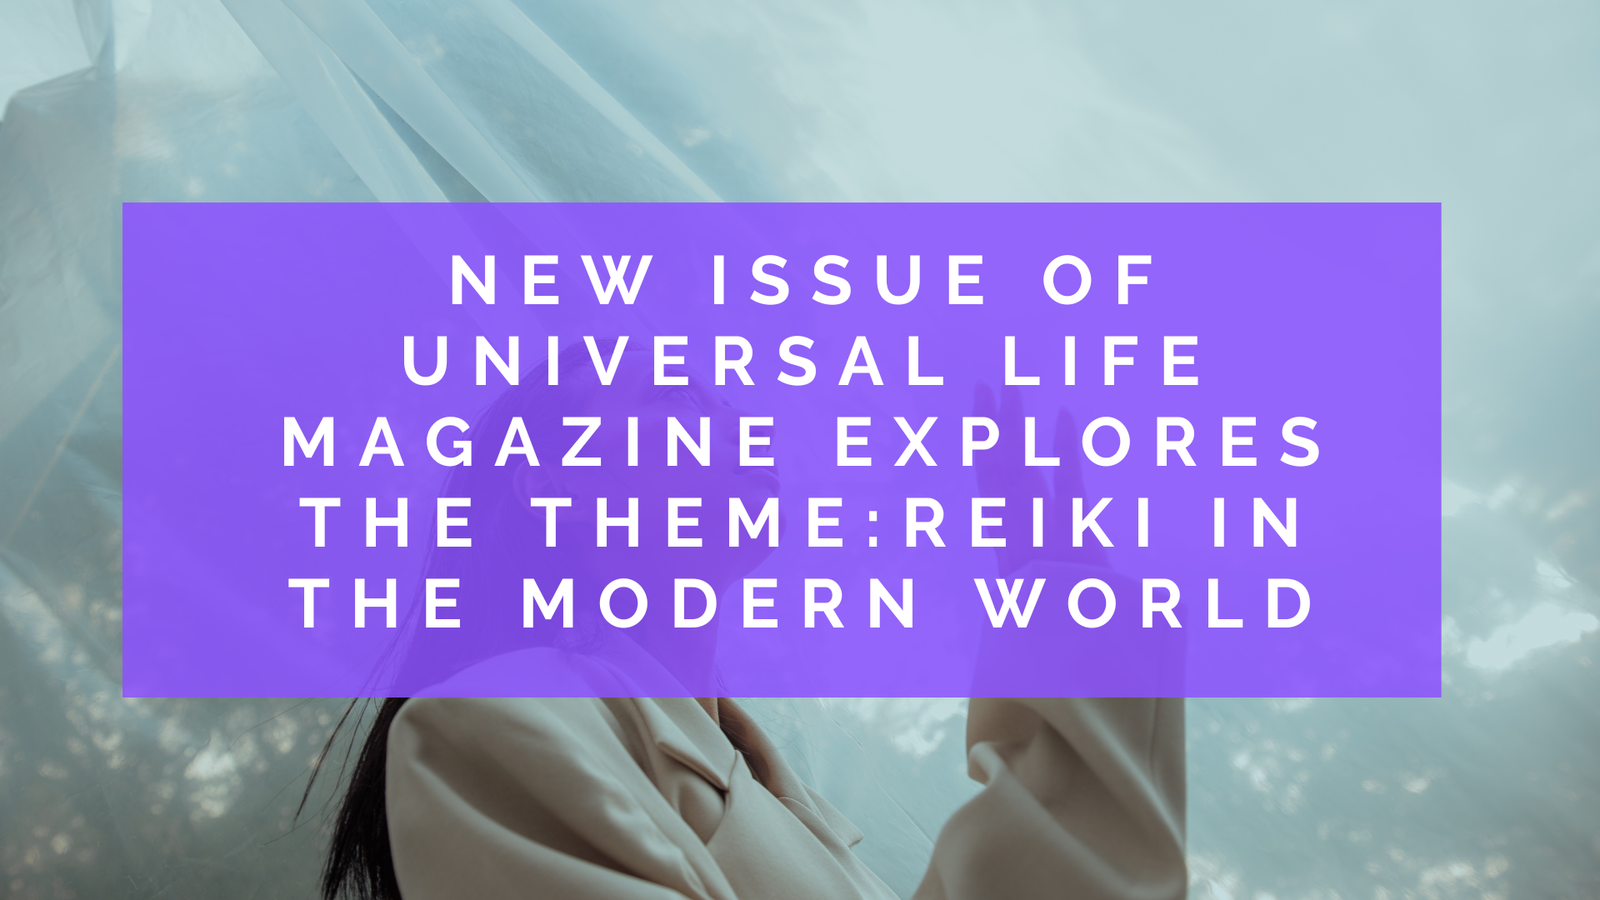 Practicing Reiki in the Modern World - Universal Life Magazine - Latest Issue Released